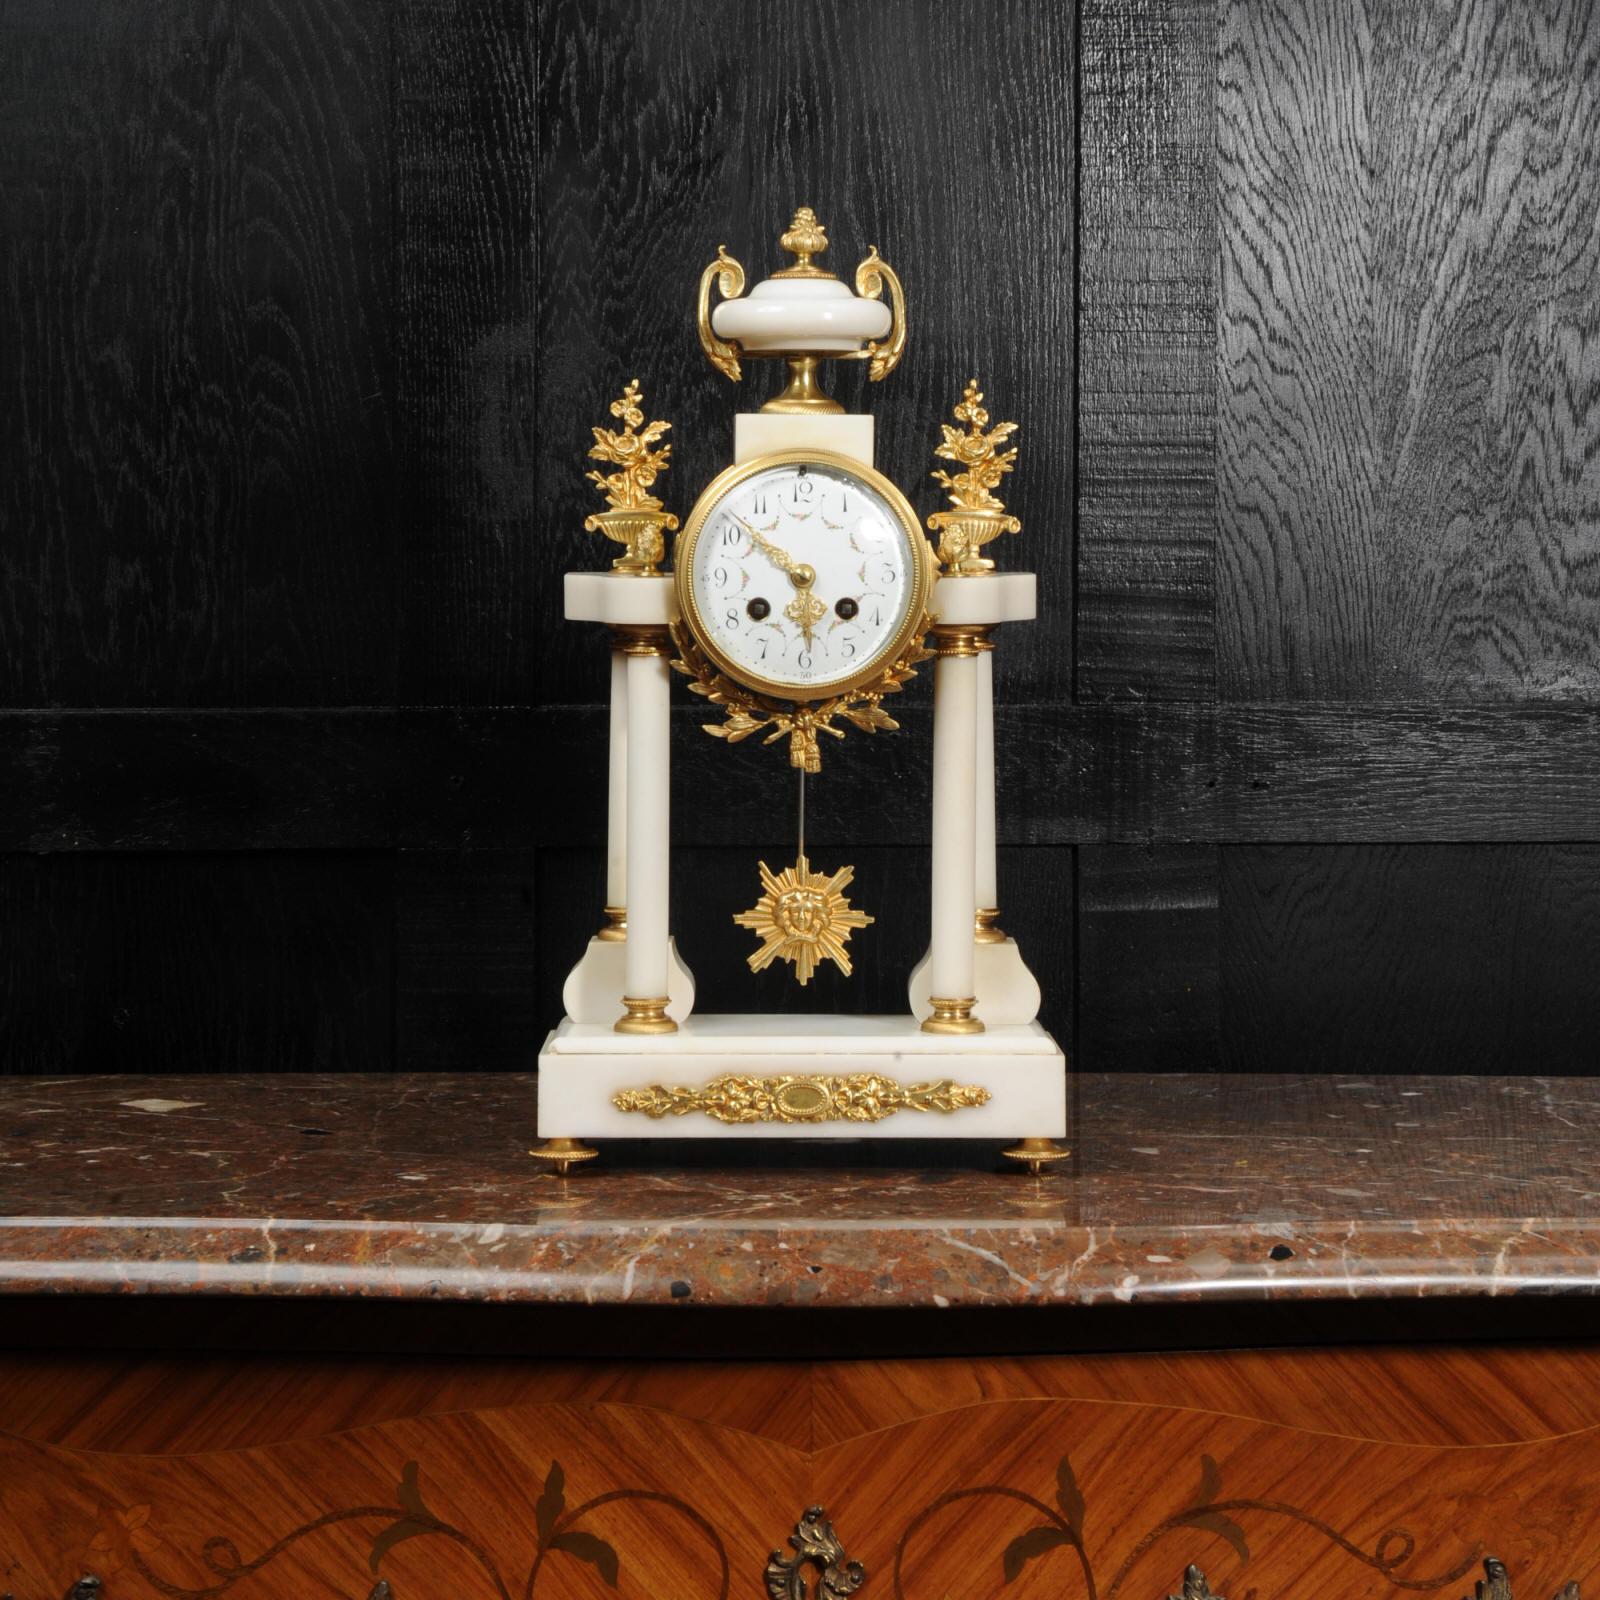 A beautiful original antique French portico clock, circa 1880. It is made of white marble mounted with ormolu (finely gilded bronze). The movement is held aloft on four marble pillars with the ormolu pendulum swinging gently below.

The dial is